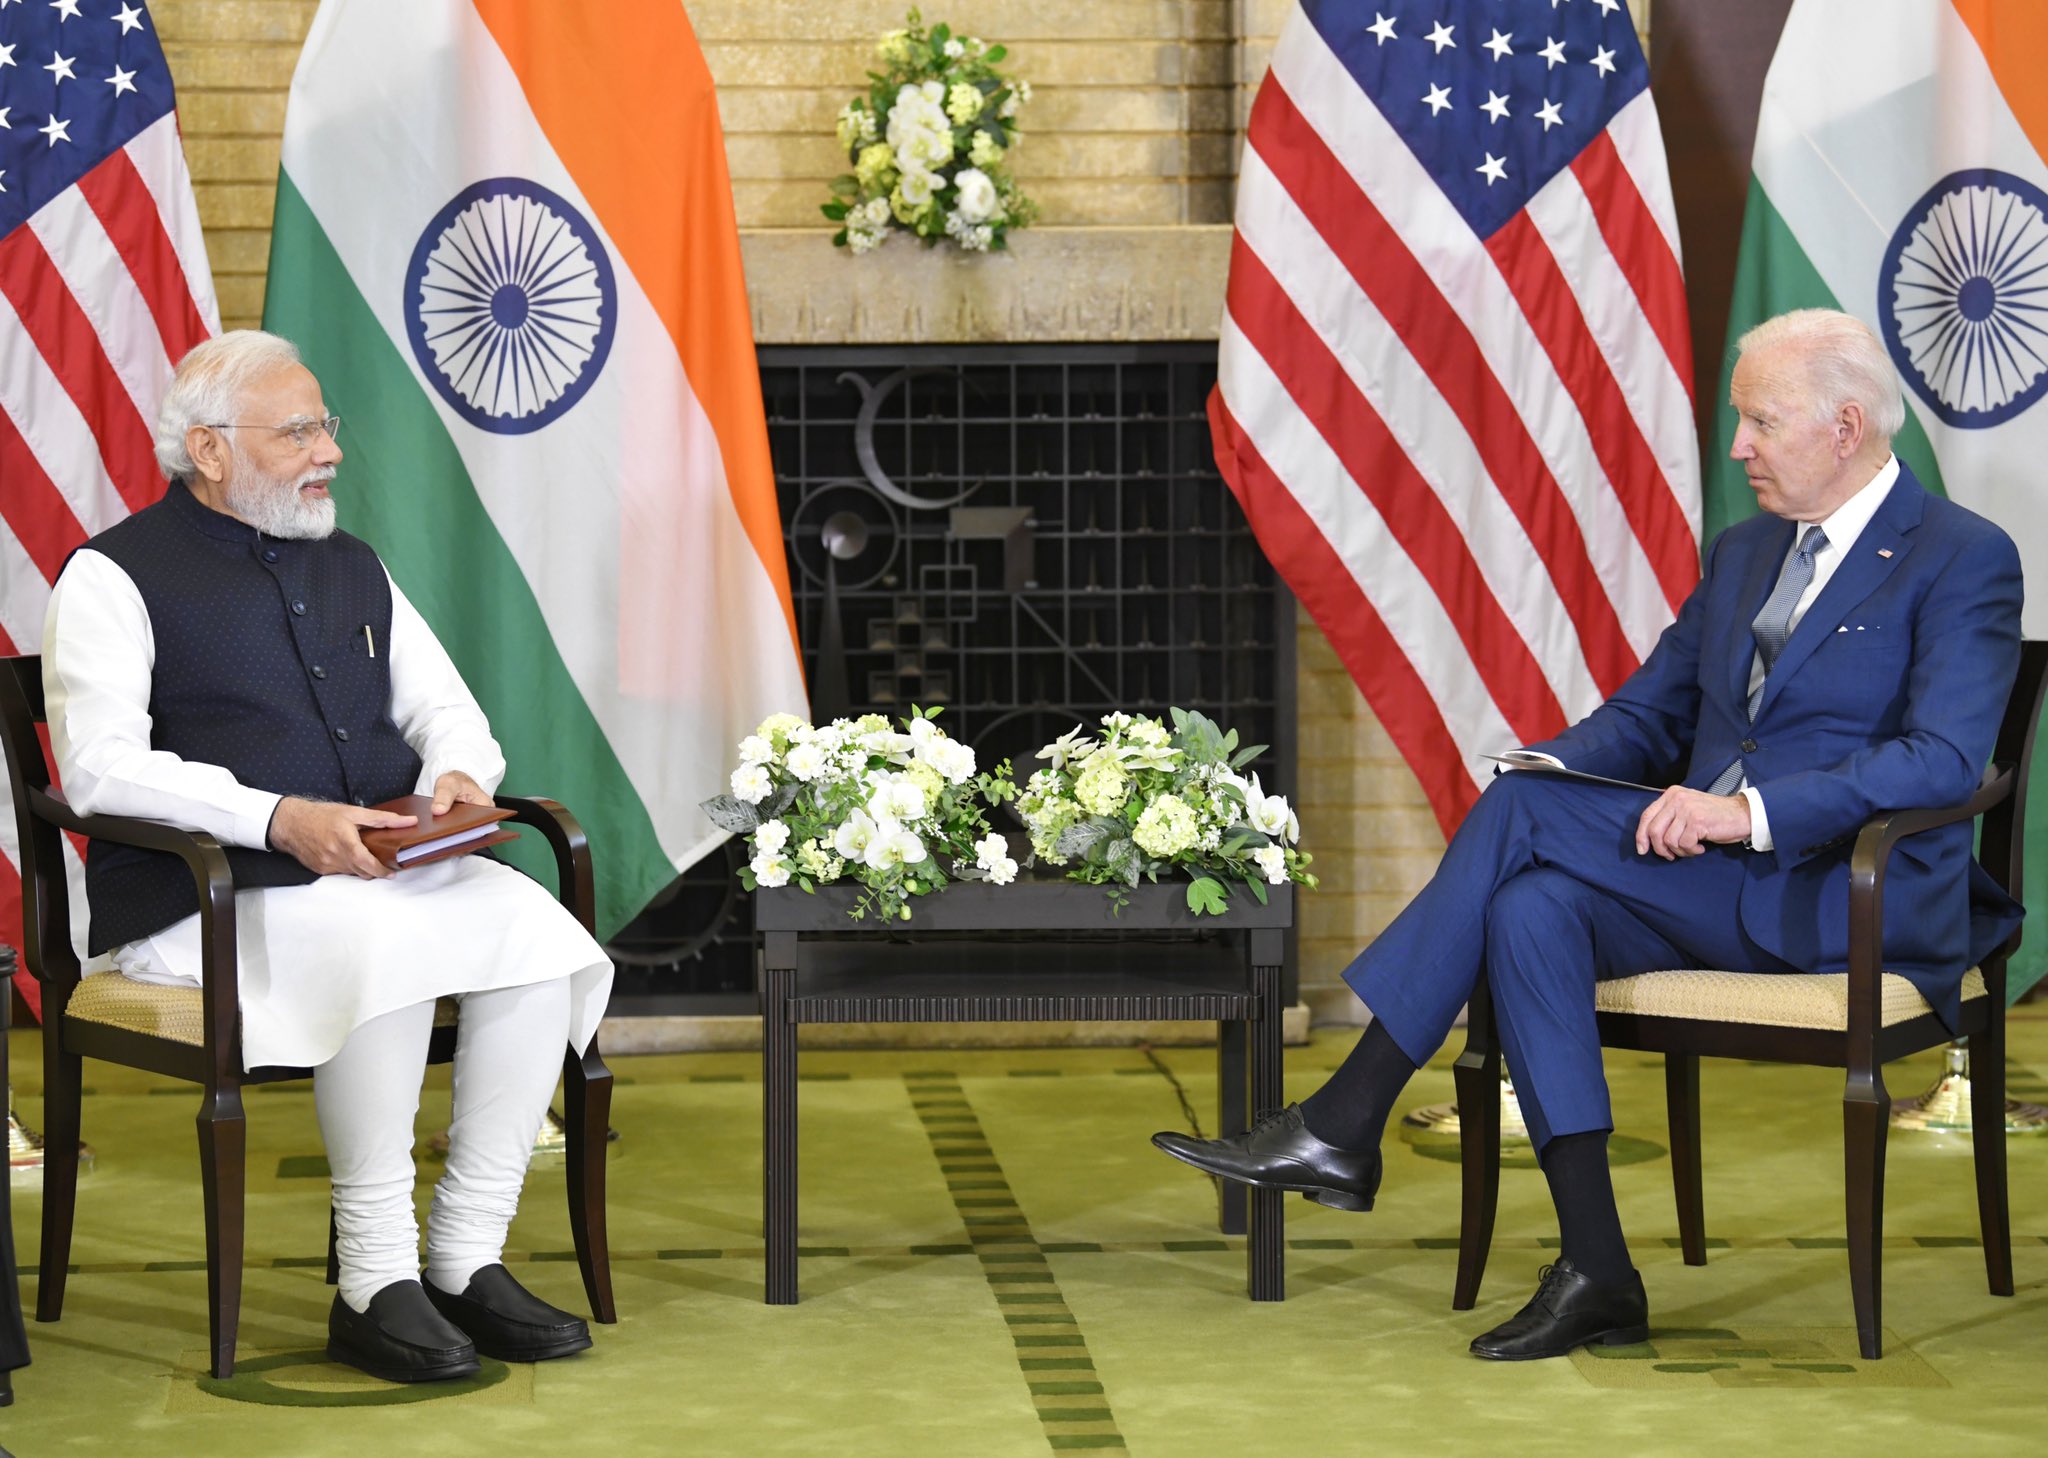 Committed to making US-India partnership among closest on earth: Prez Biden tells PM Modi in Japan